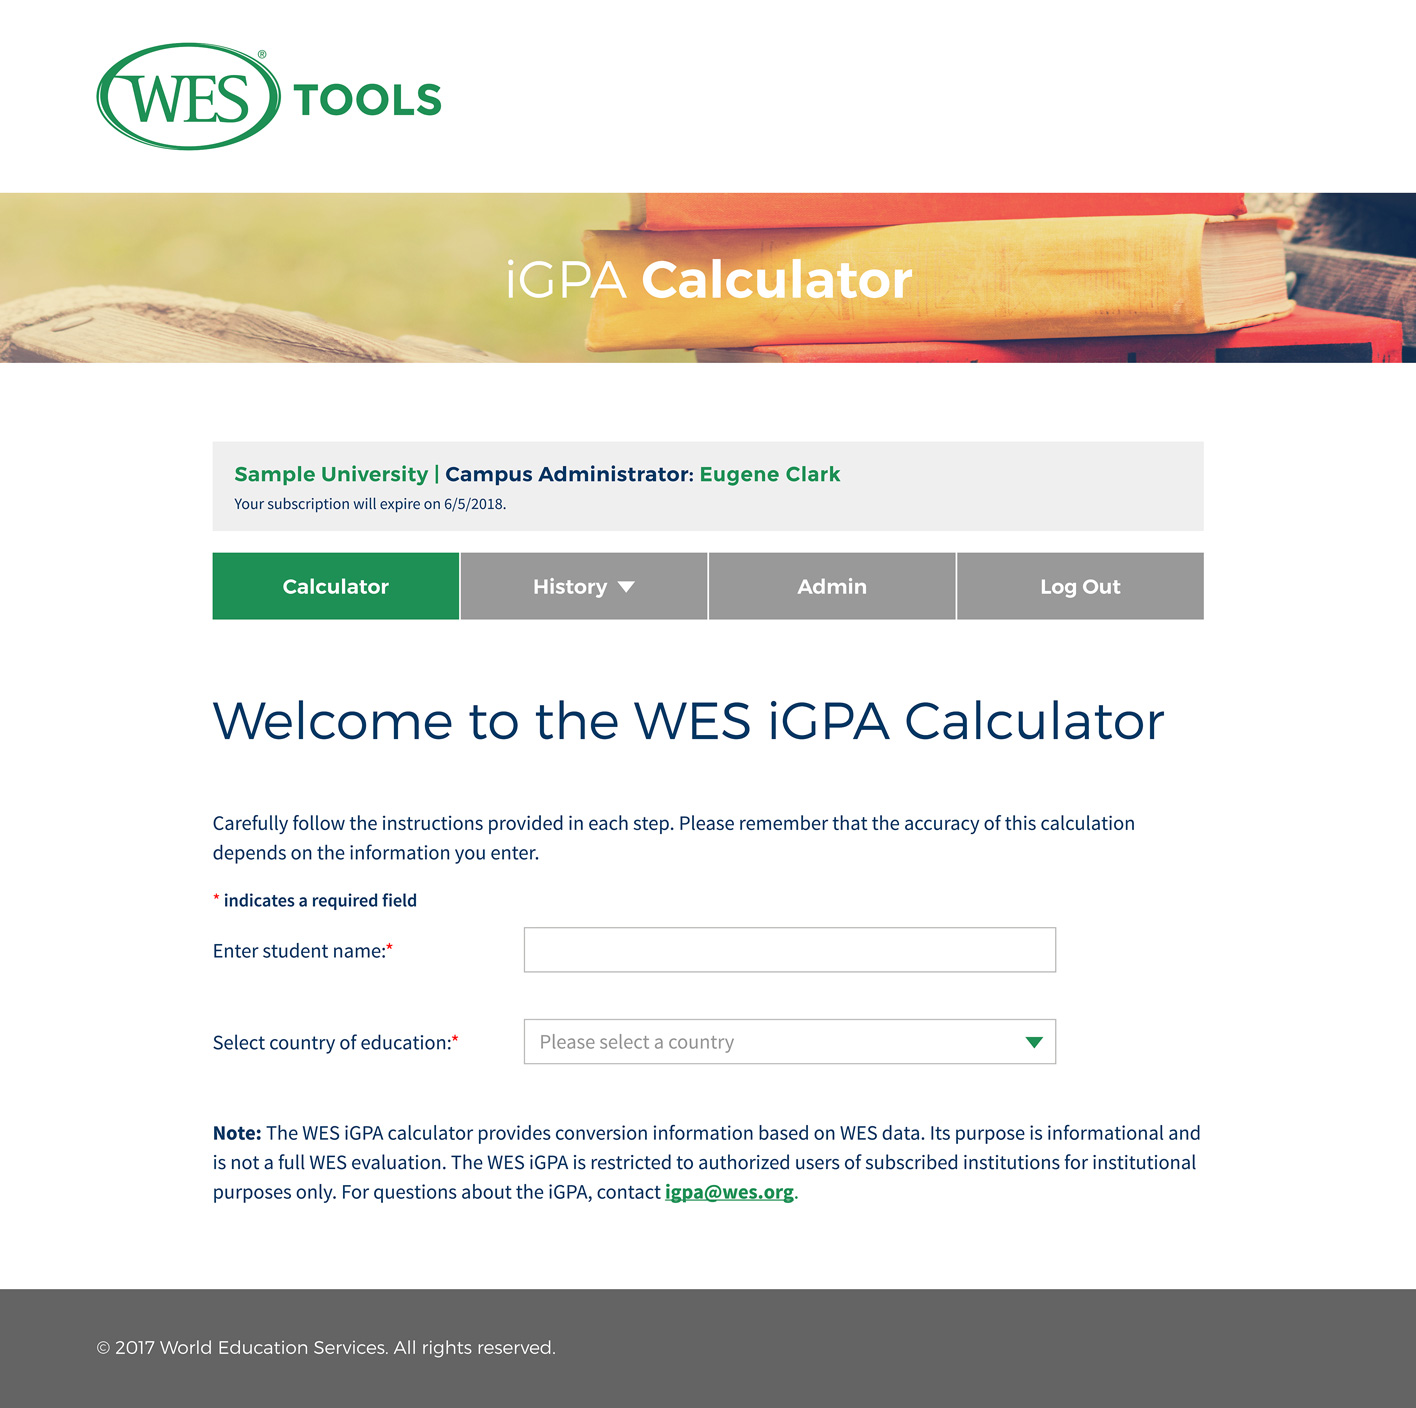 Design for the welcome page of World Education Services' iGPA calendar. Includes nav for calculator, history, admin, and logout; also includes text fields to enter student name and school.